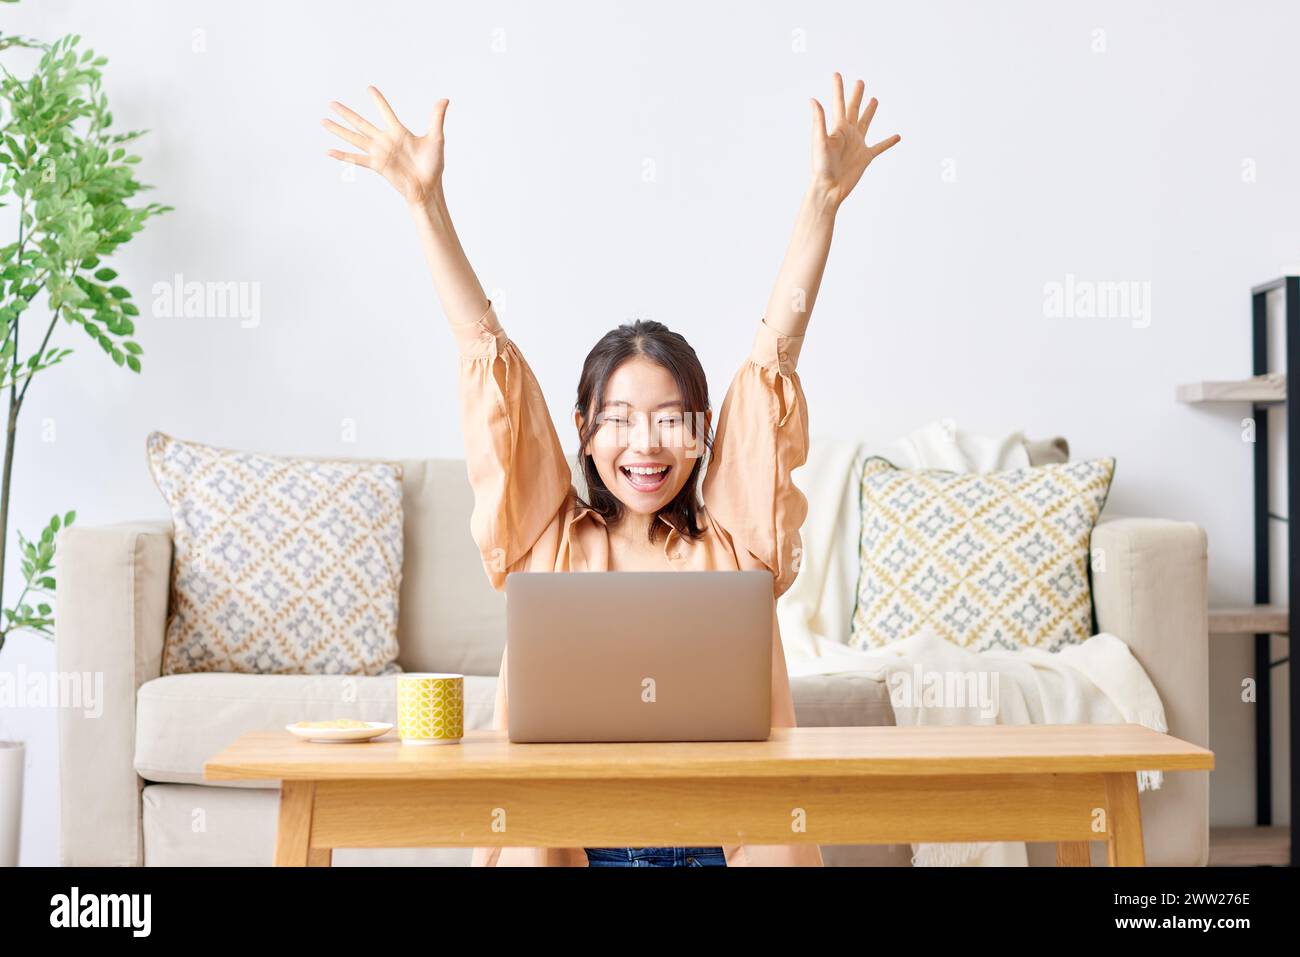 A woman sitting on a couch with her arms up and a laptop Stock Photo